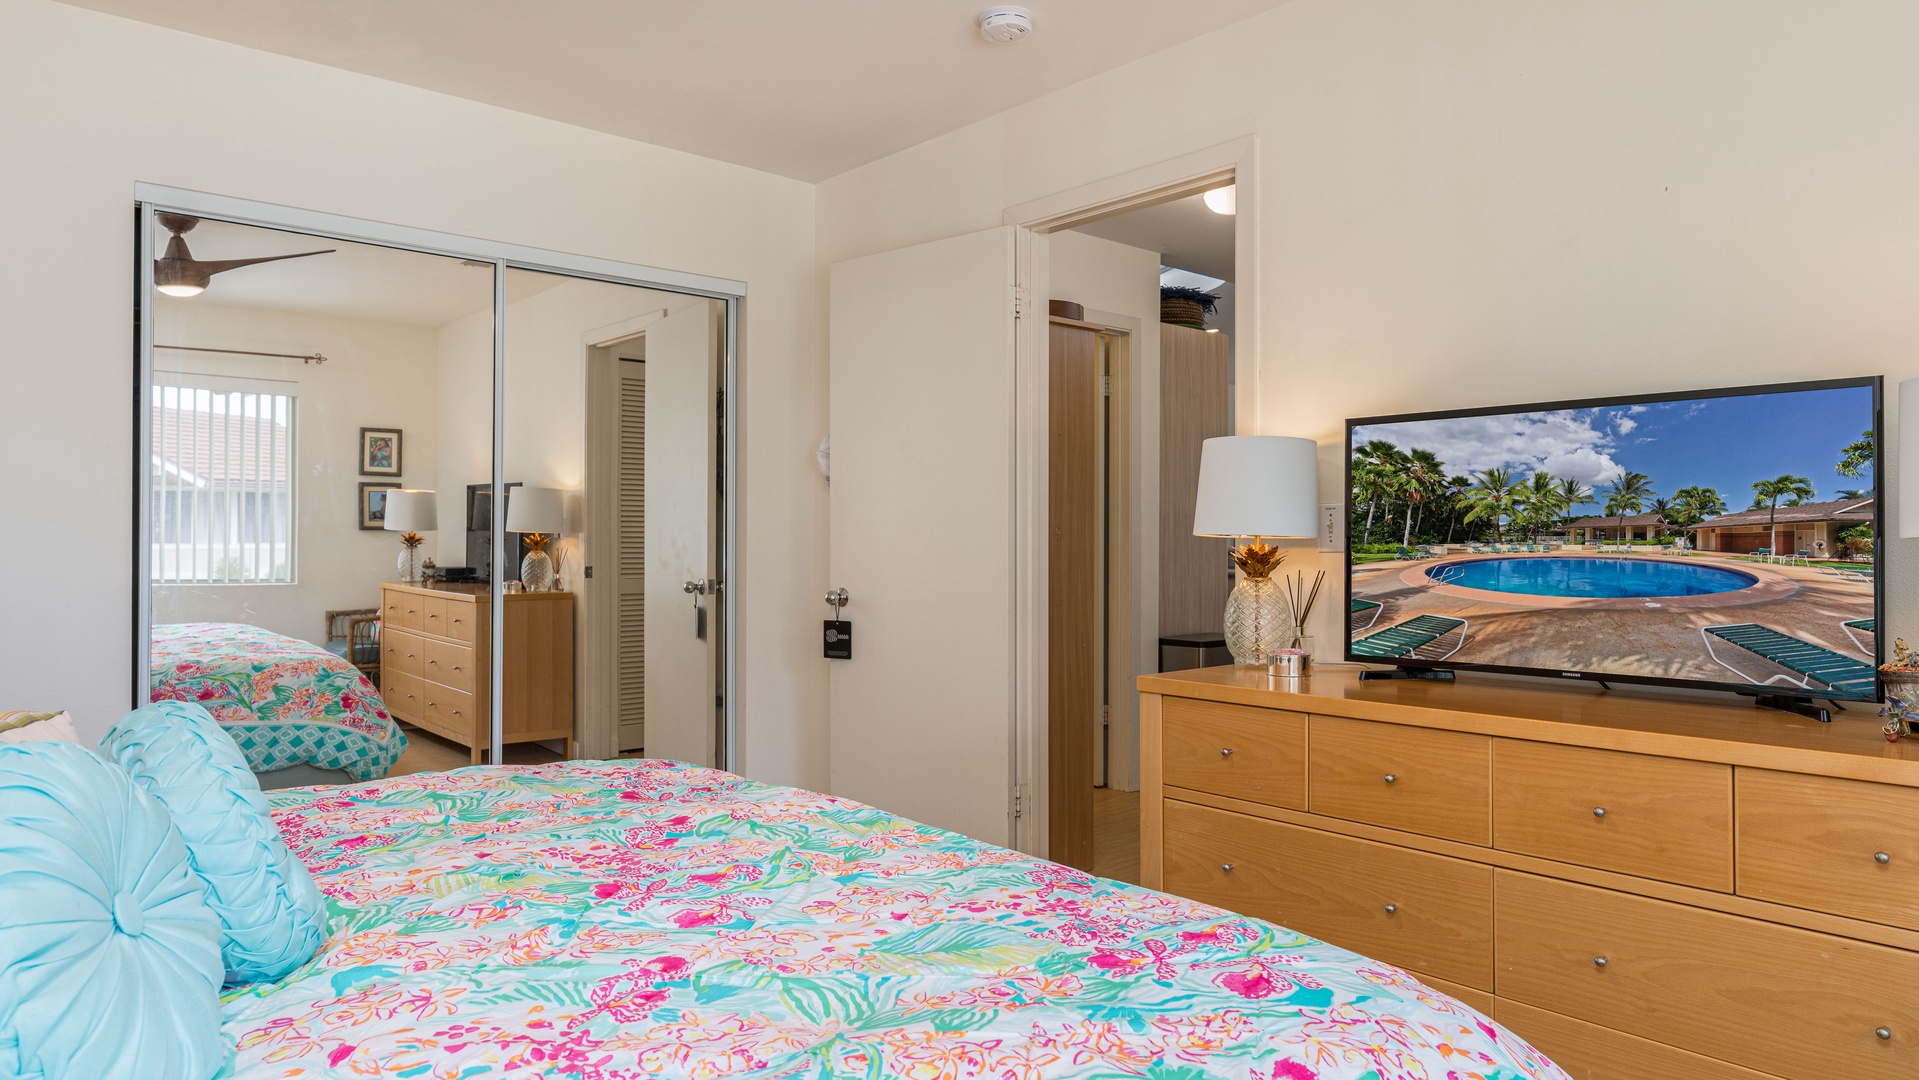 Kapolei Vacation Rentals, Fairways at Ko Olina 4A - The primary guest bedroom includes a dresser and television.